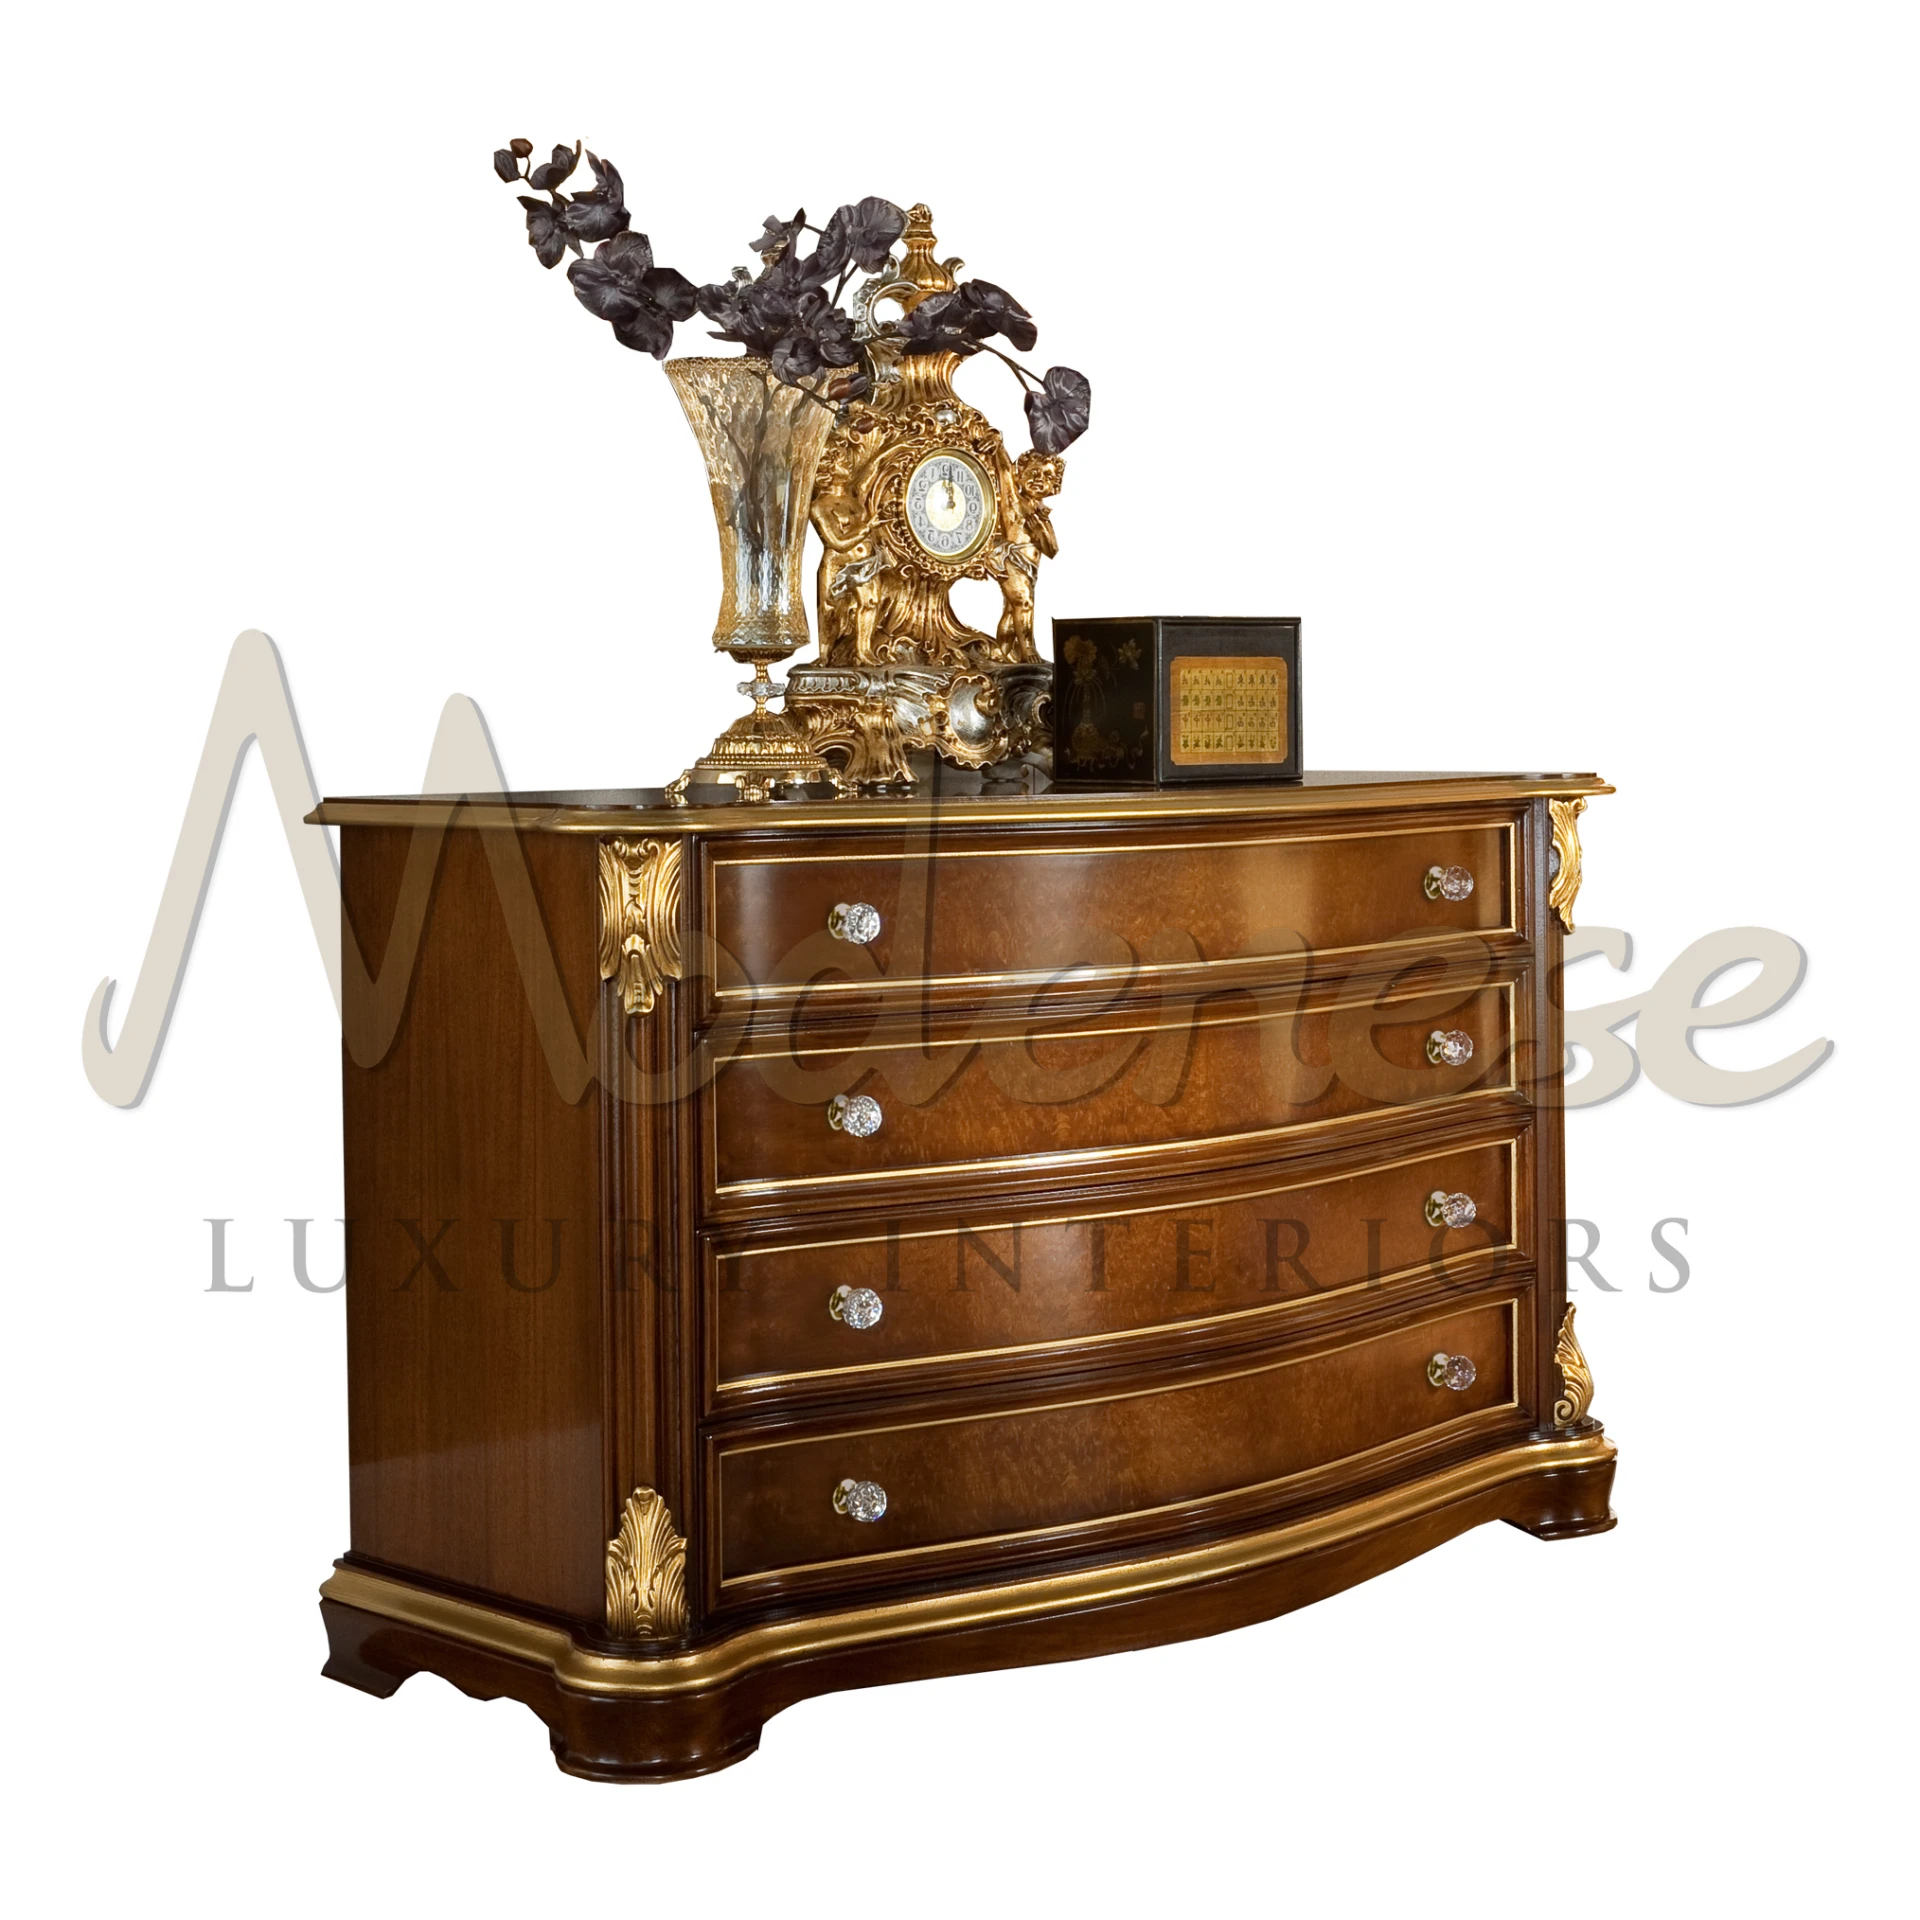 Ornate Baroque wooden chest of drawers with gold accents and crystal knobs by Modenese                                                                   